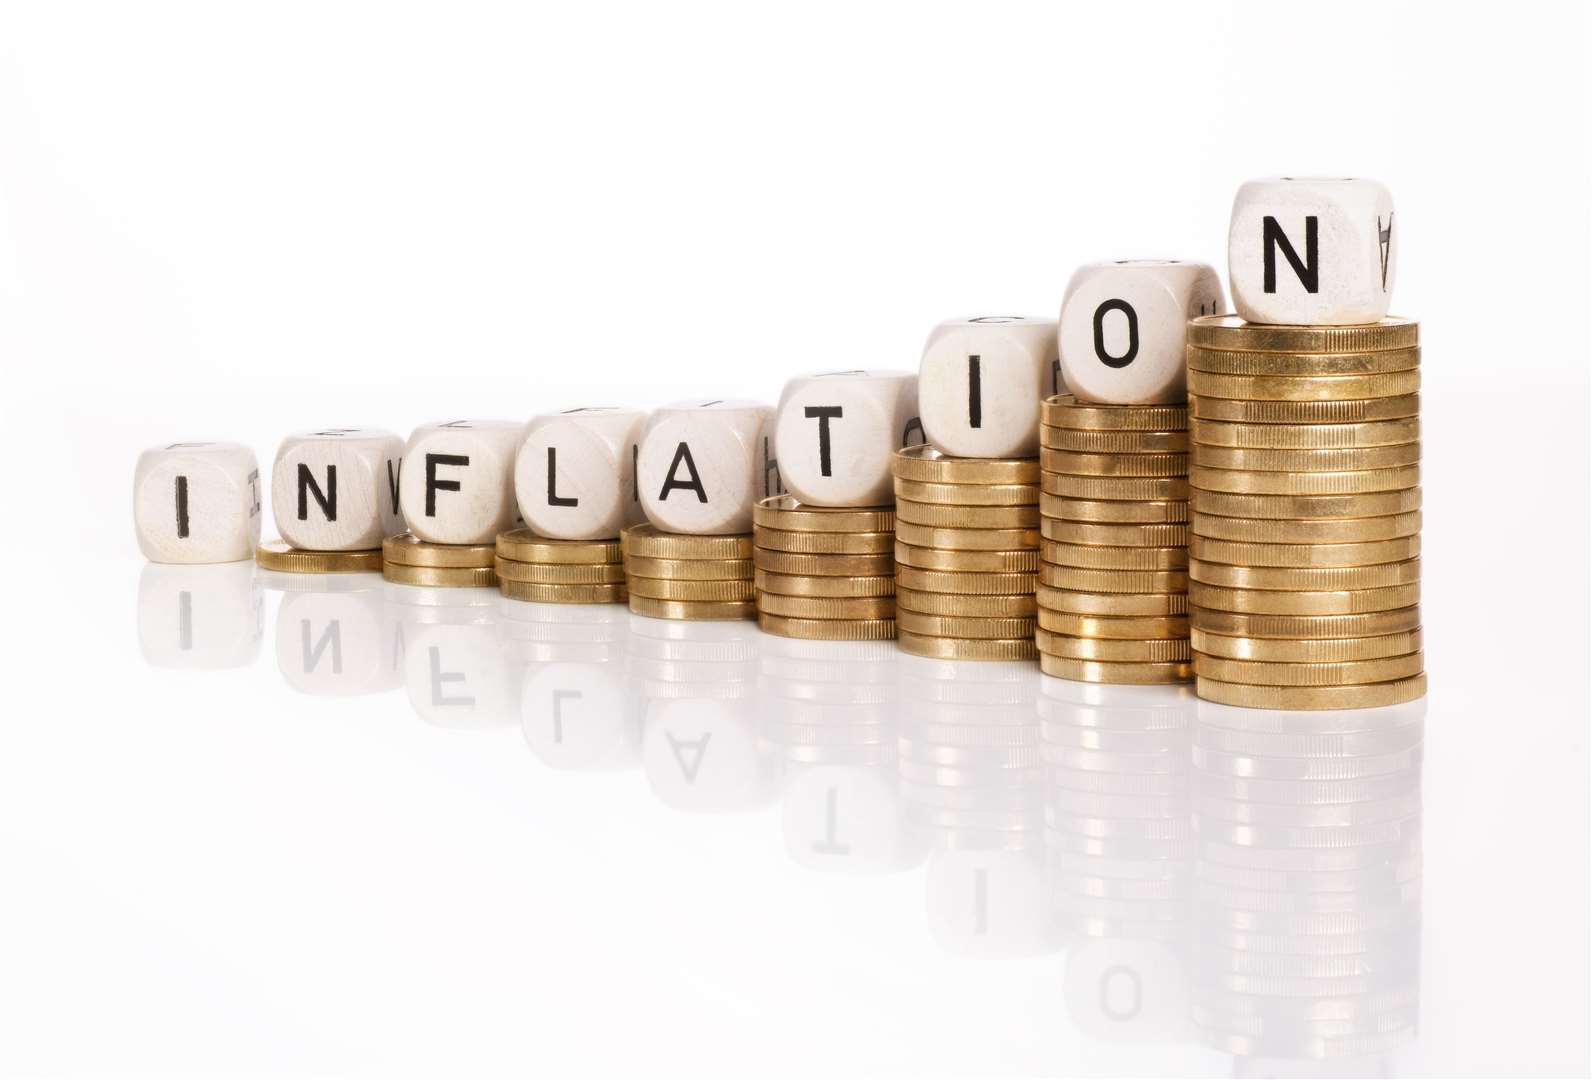 Inflation remained unchanged at 6.7 per cent, despite some economists predicting the rate might drop to 6.5 per cent